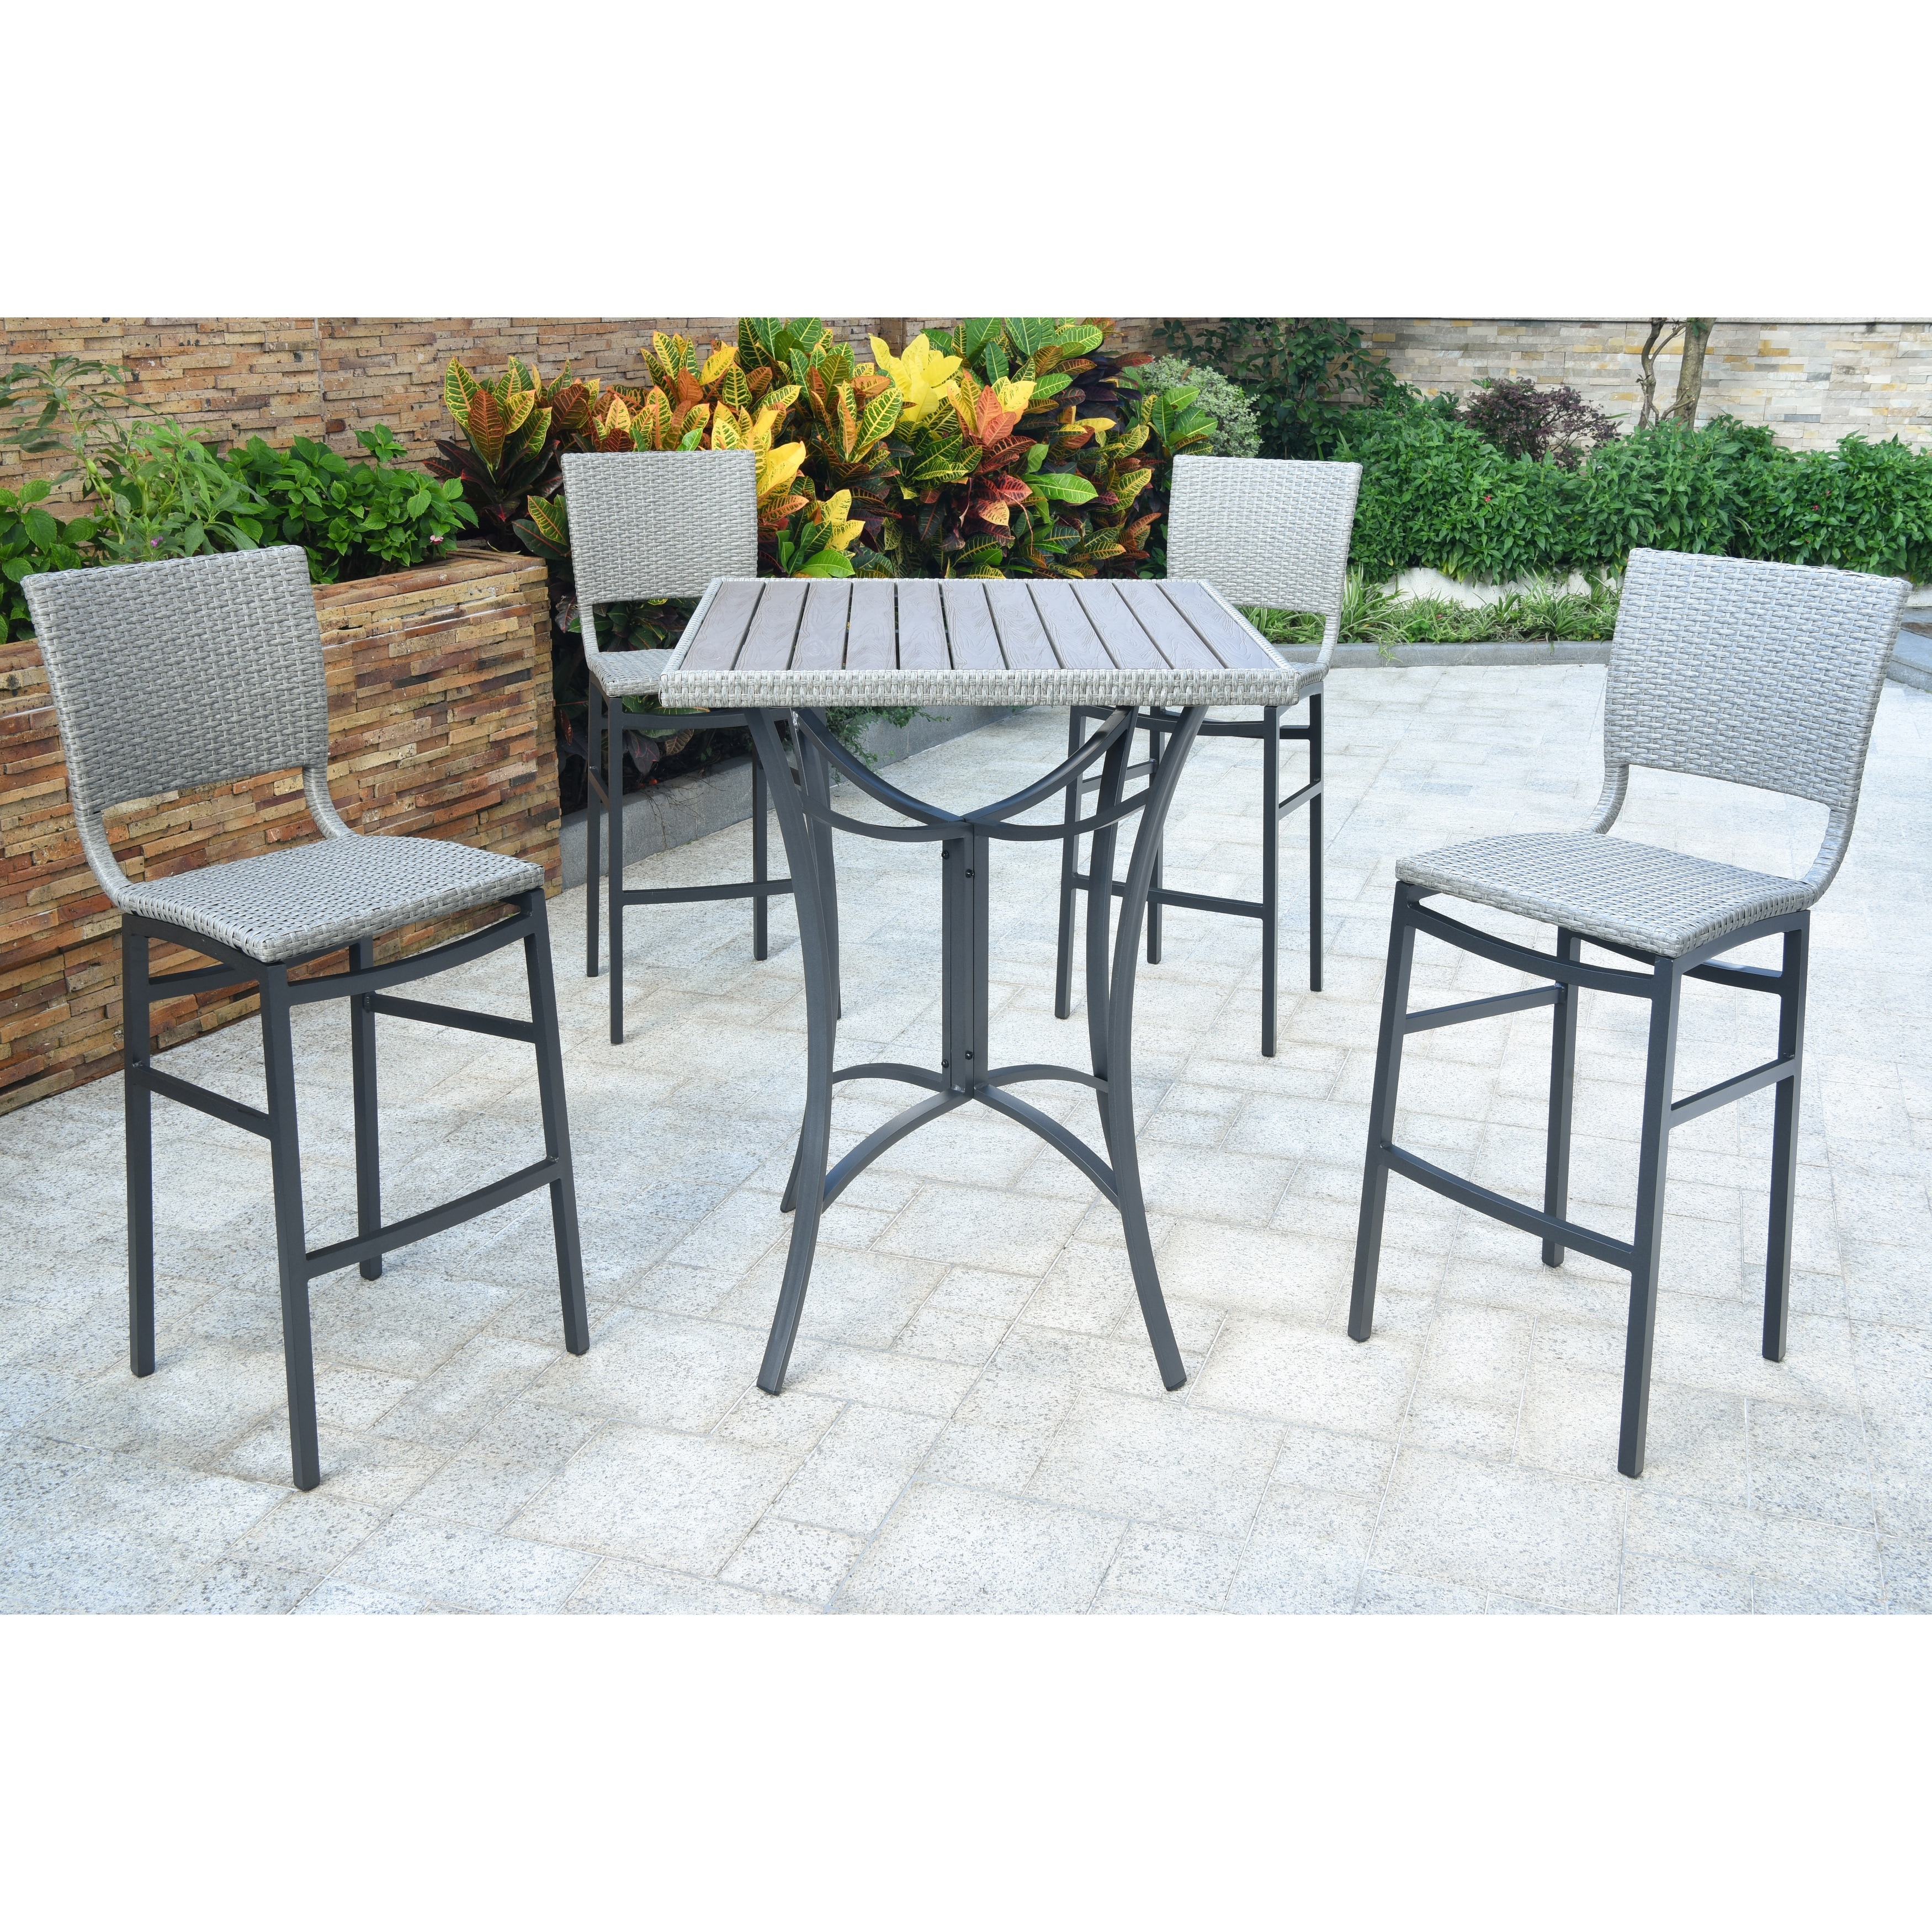 Barcelona Set of Two Resin Wicker Patio Aluminum Bar Bistro Chair 